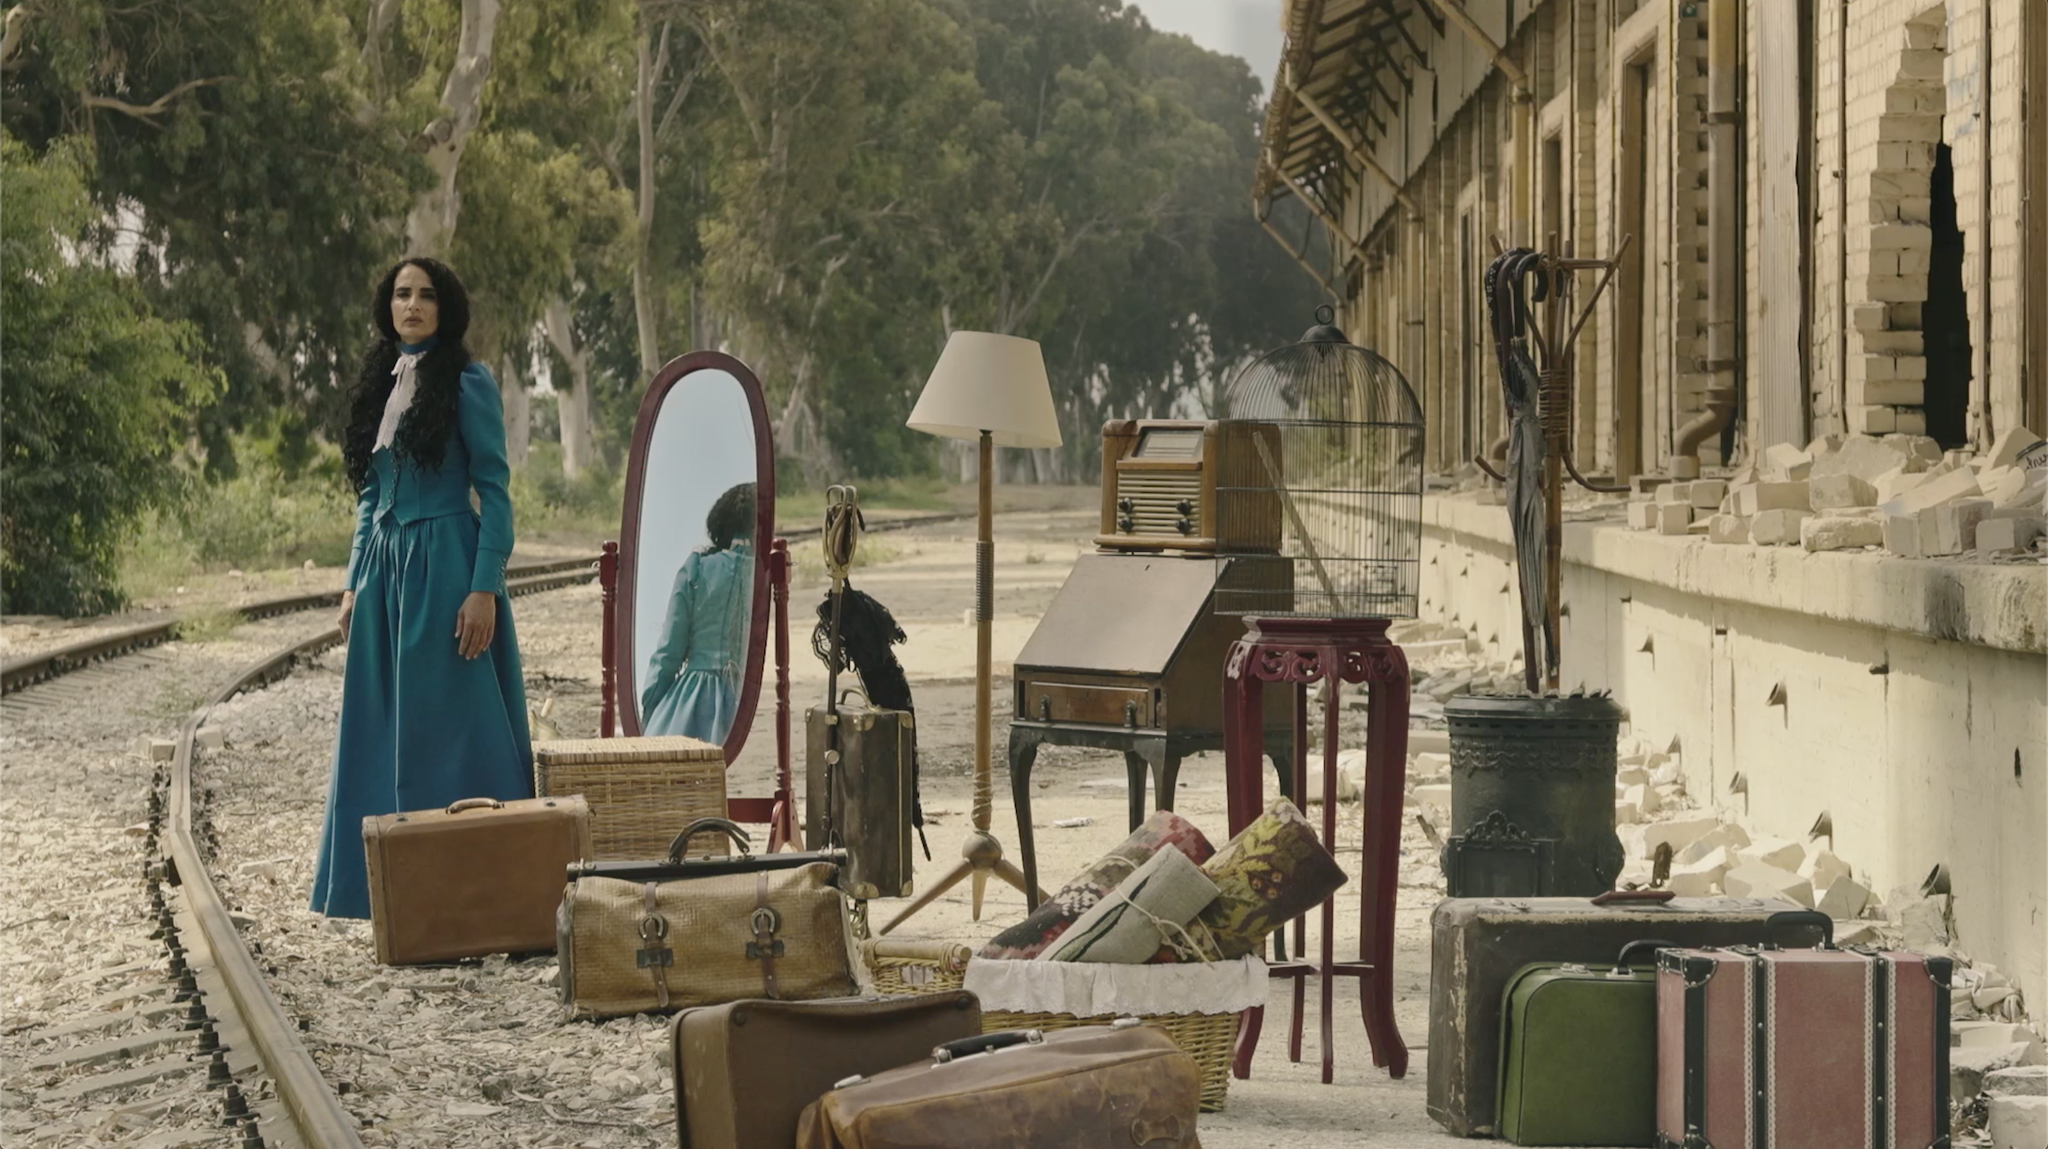 A woman in a blue dress stands beside an assemblage of furniture in the outdoors.